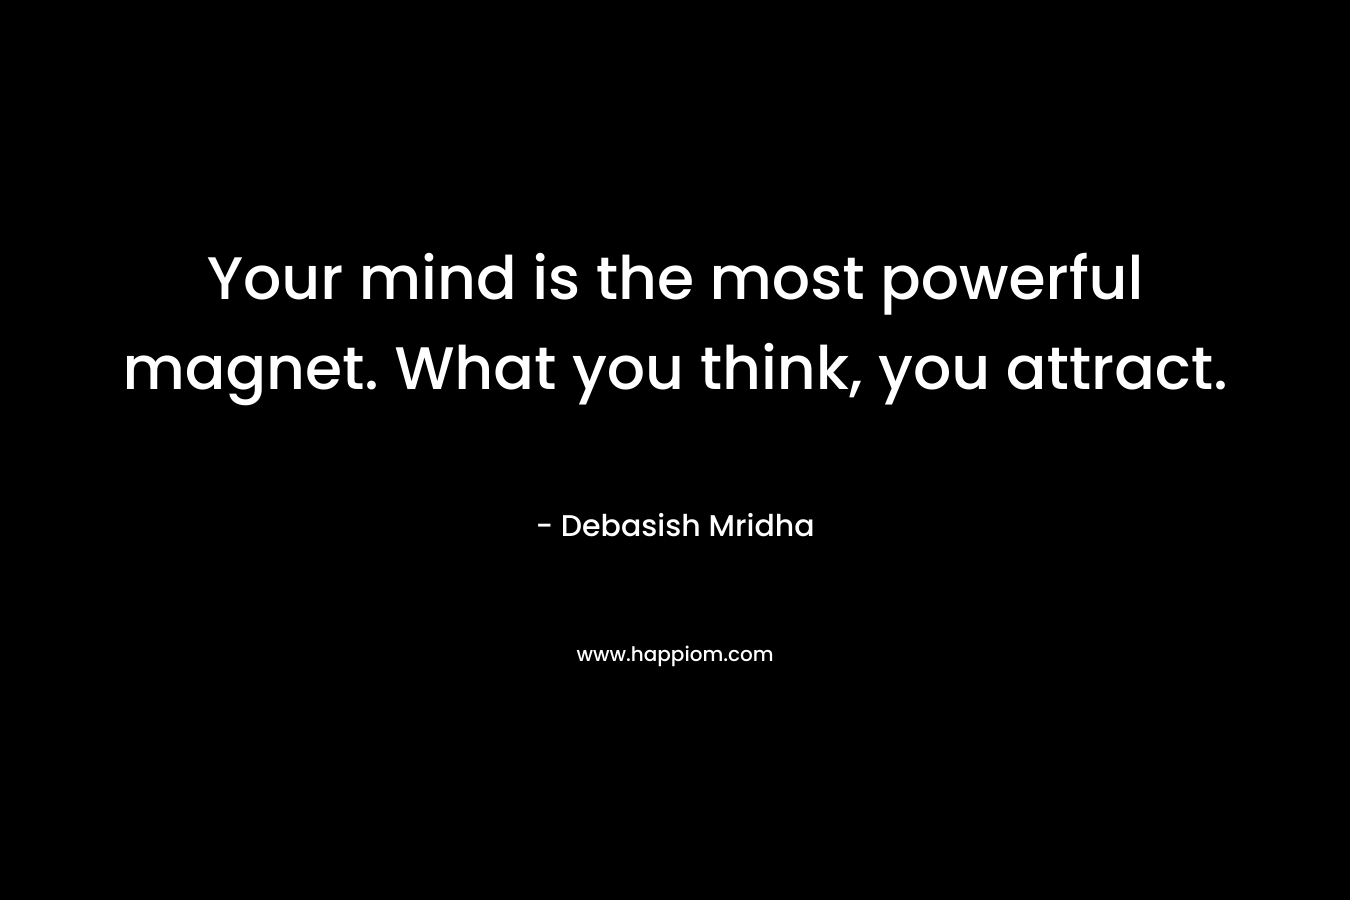 Your mind is the most powerful magnet. What you think, you attract.